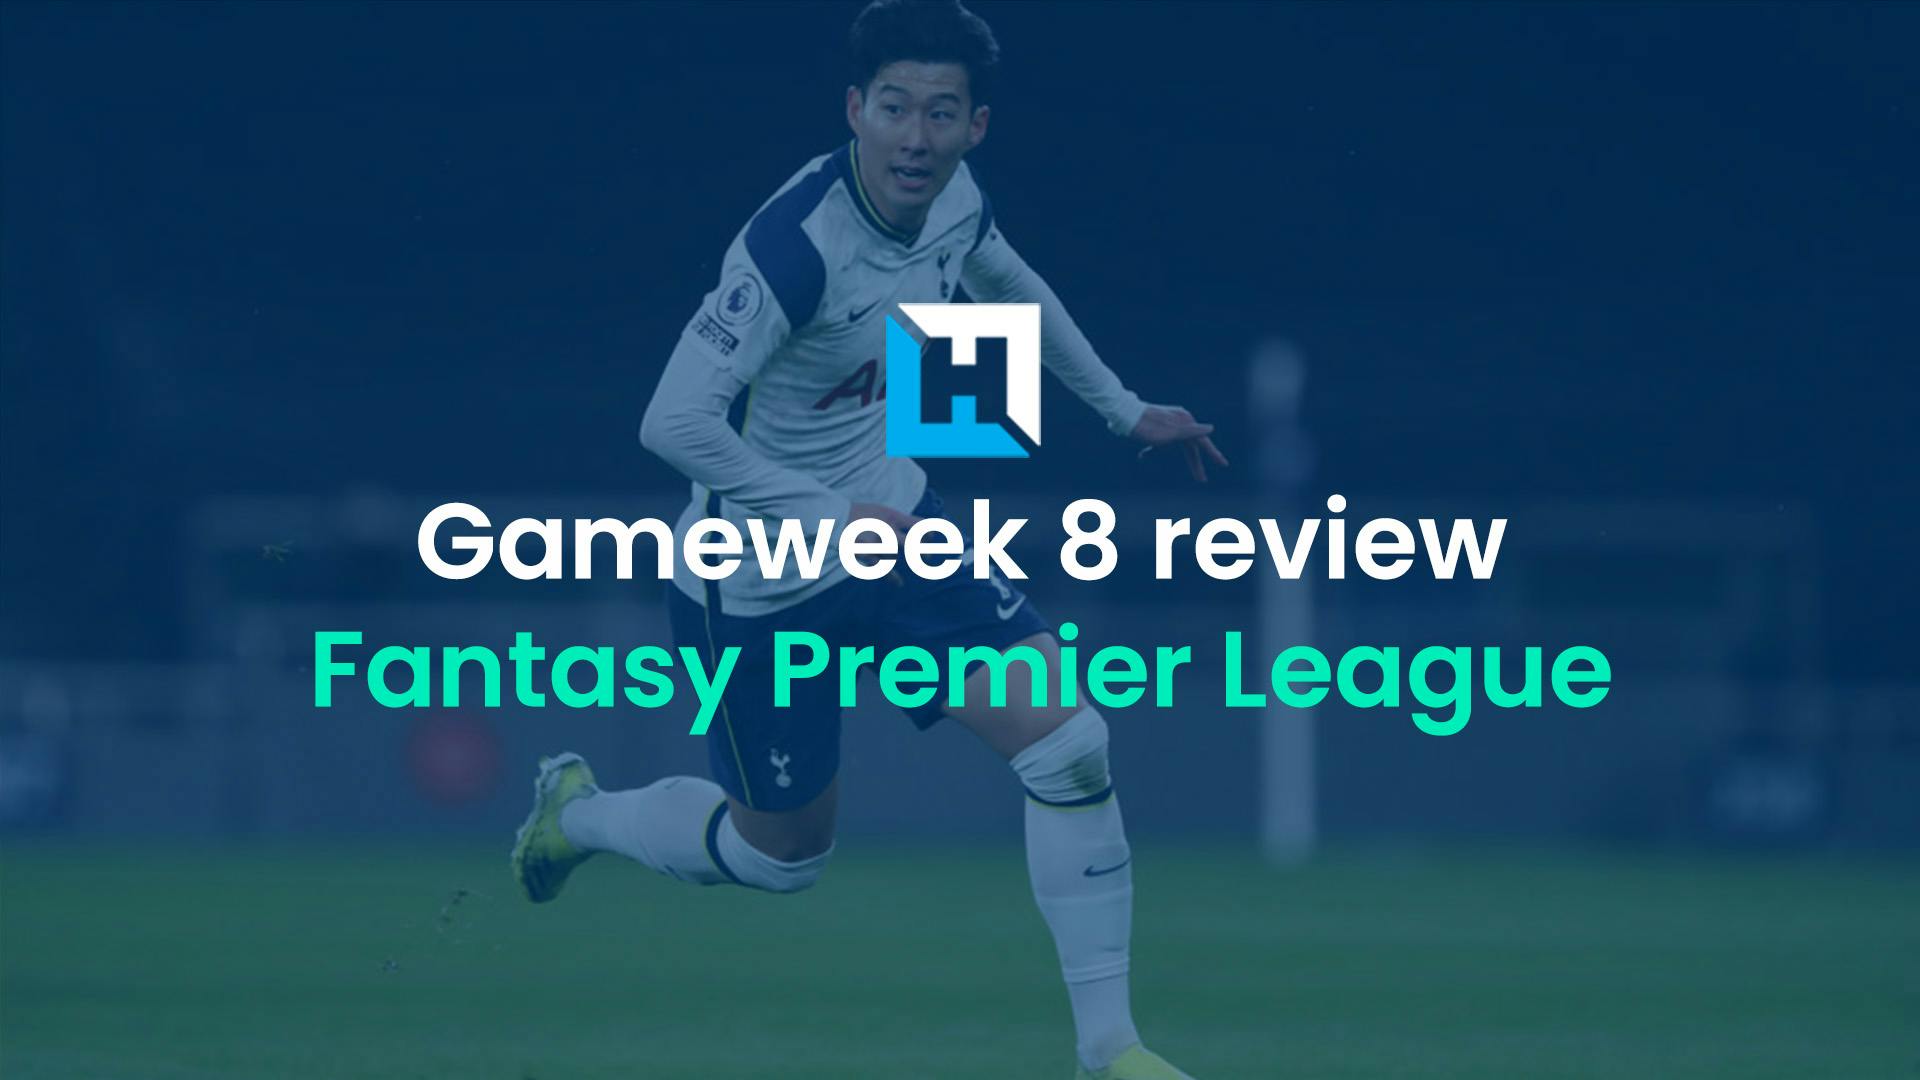 FPL Gameweek 8 review: Stats, predicted points success and a four-premium Wildcard team tops overall rankings